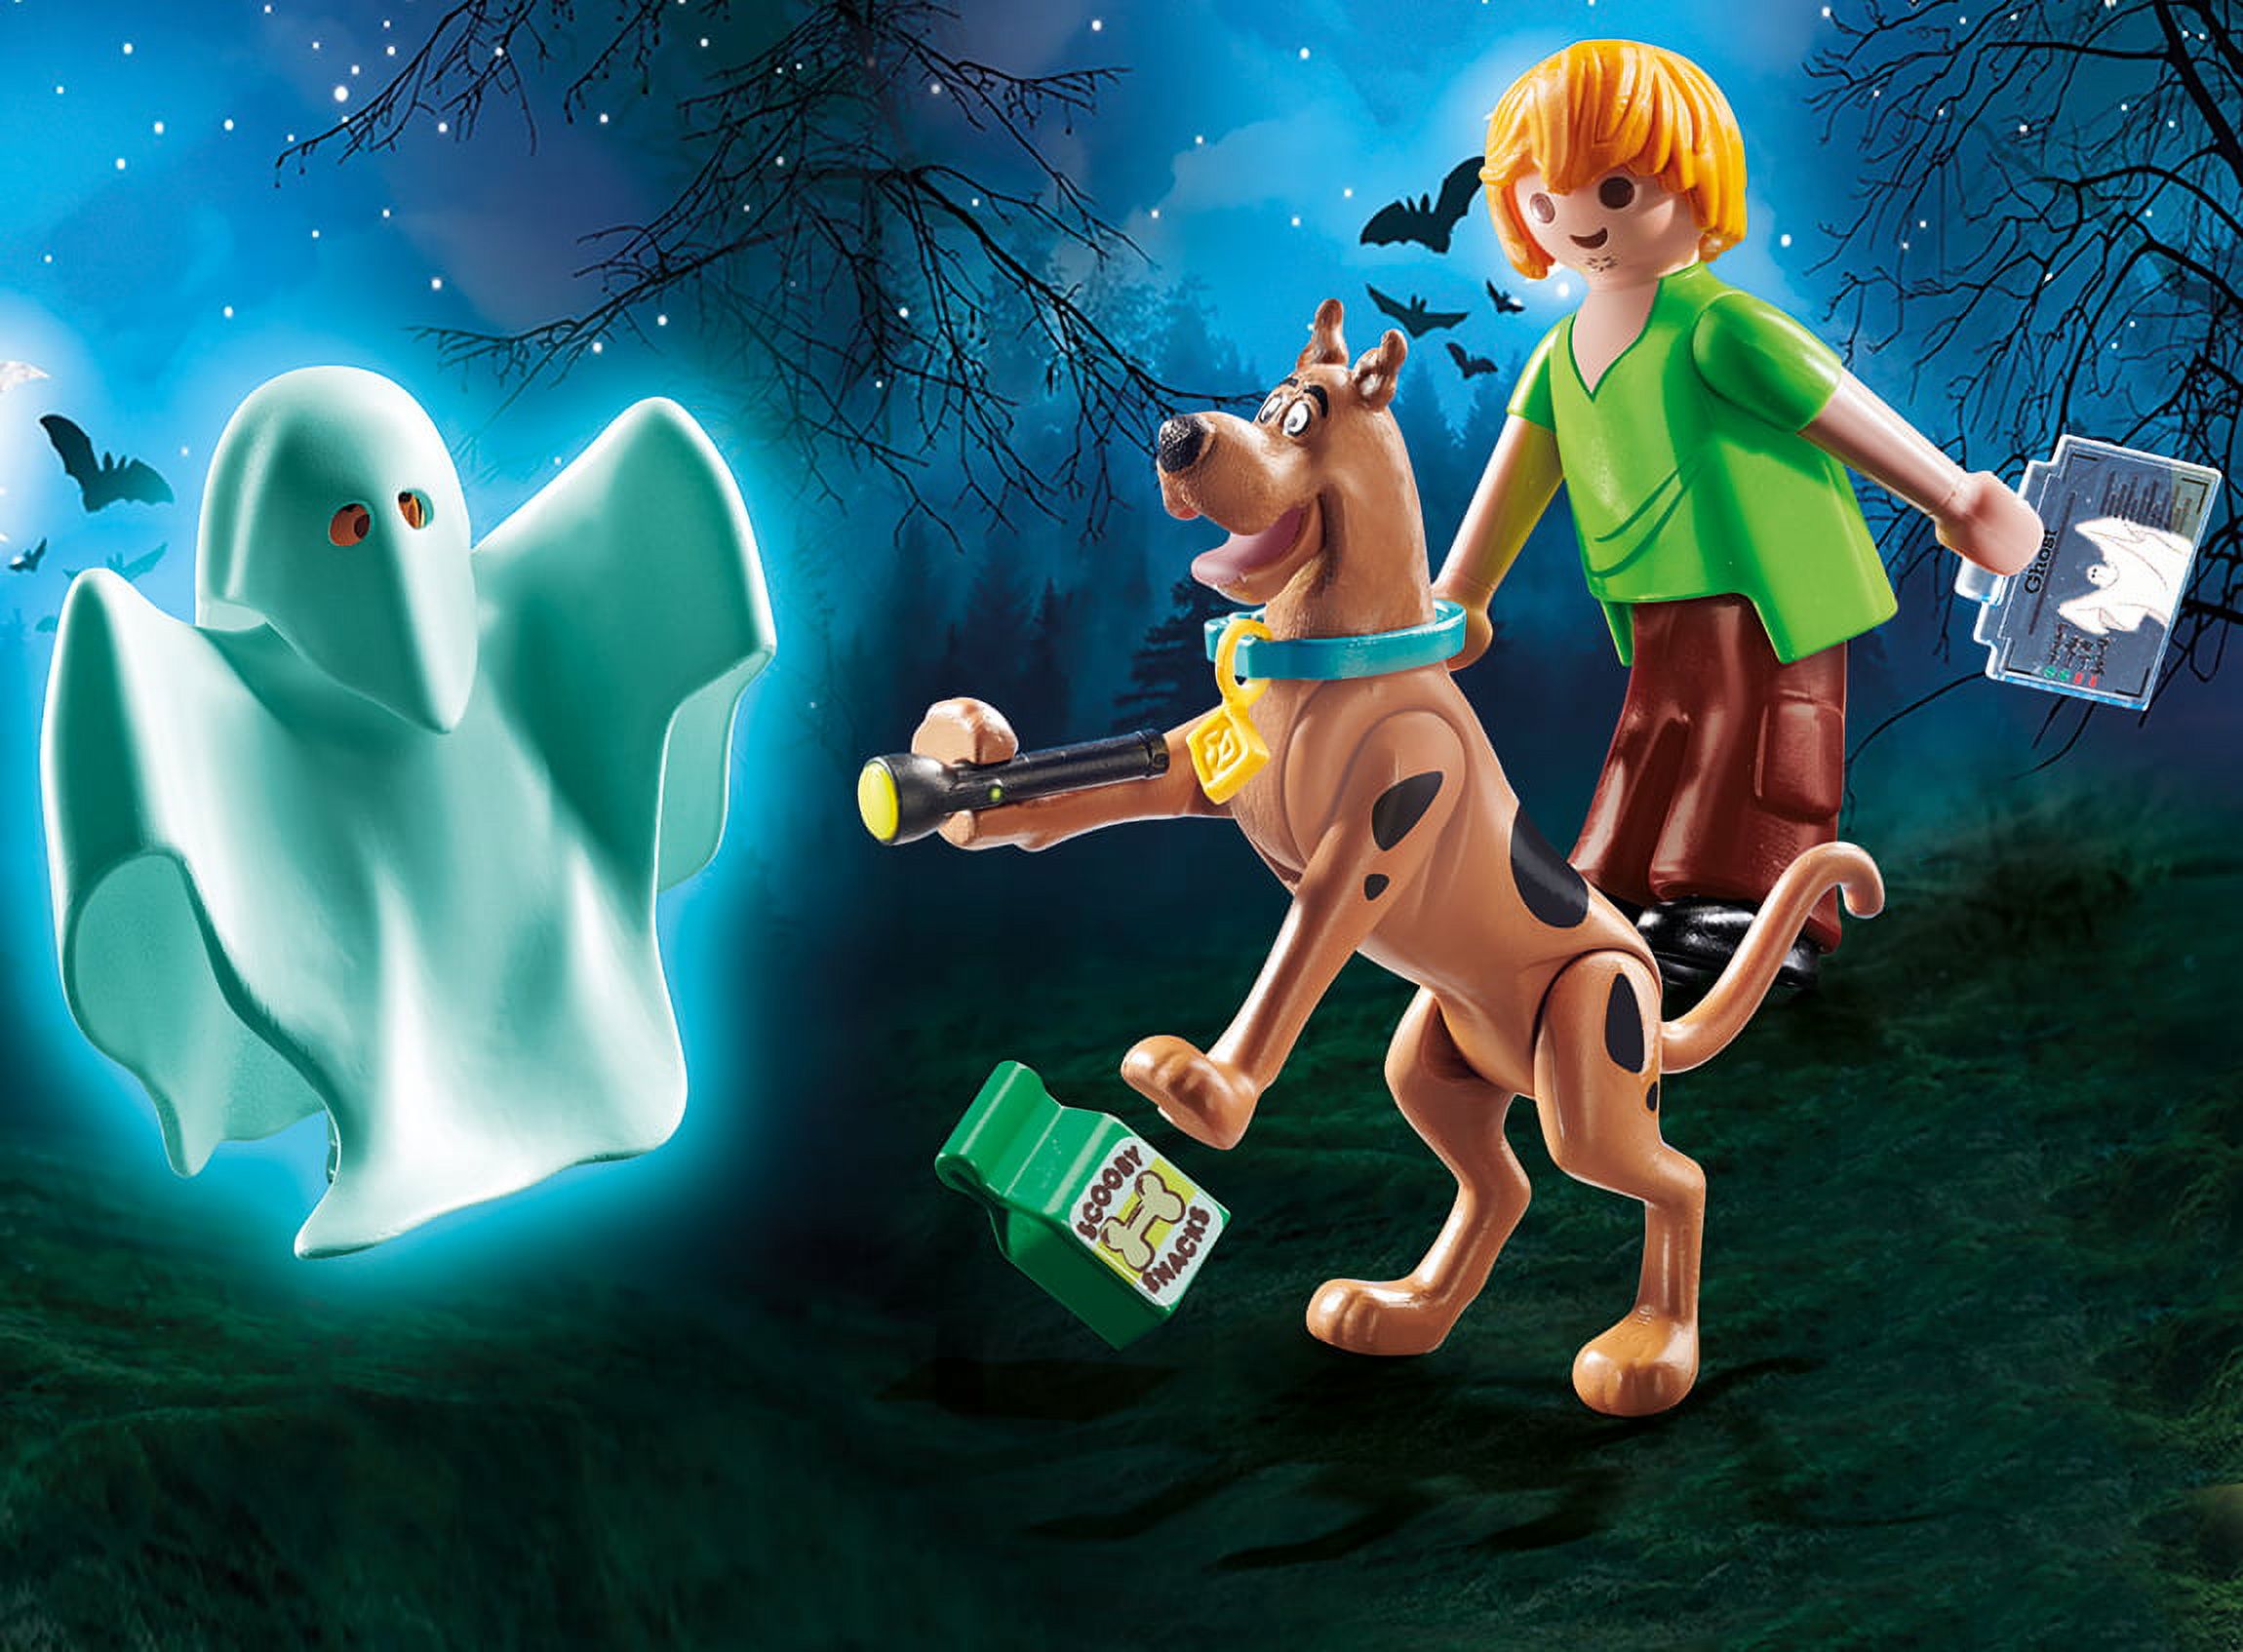 PLAYMOBIL Scooby Doo Scooby & Shaggy with Ghost Action Figure Set - image 3 of 5